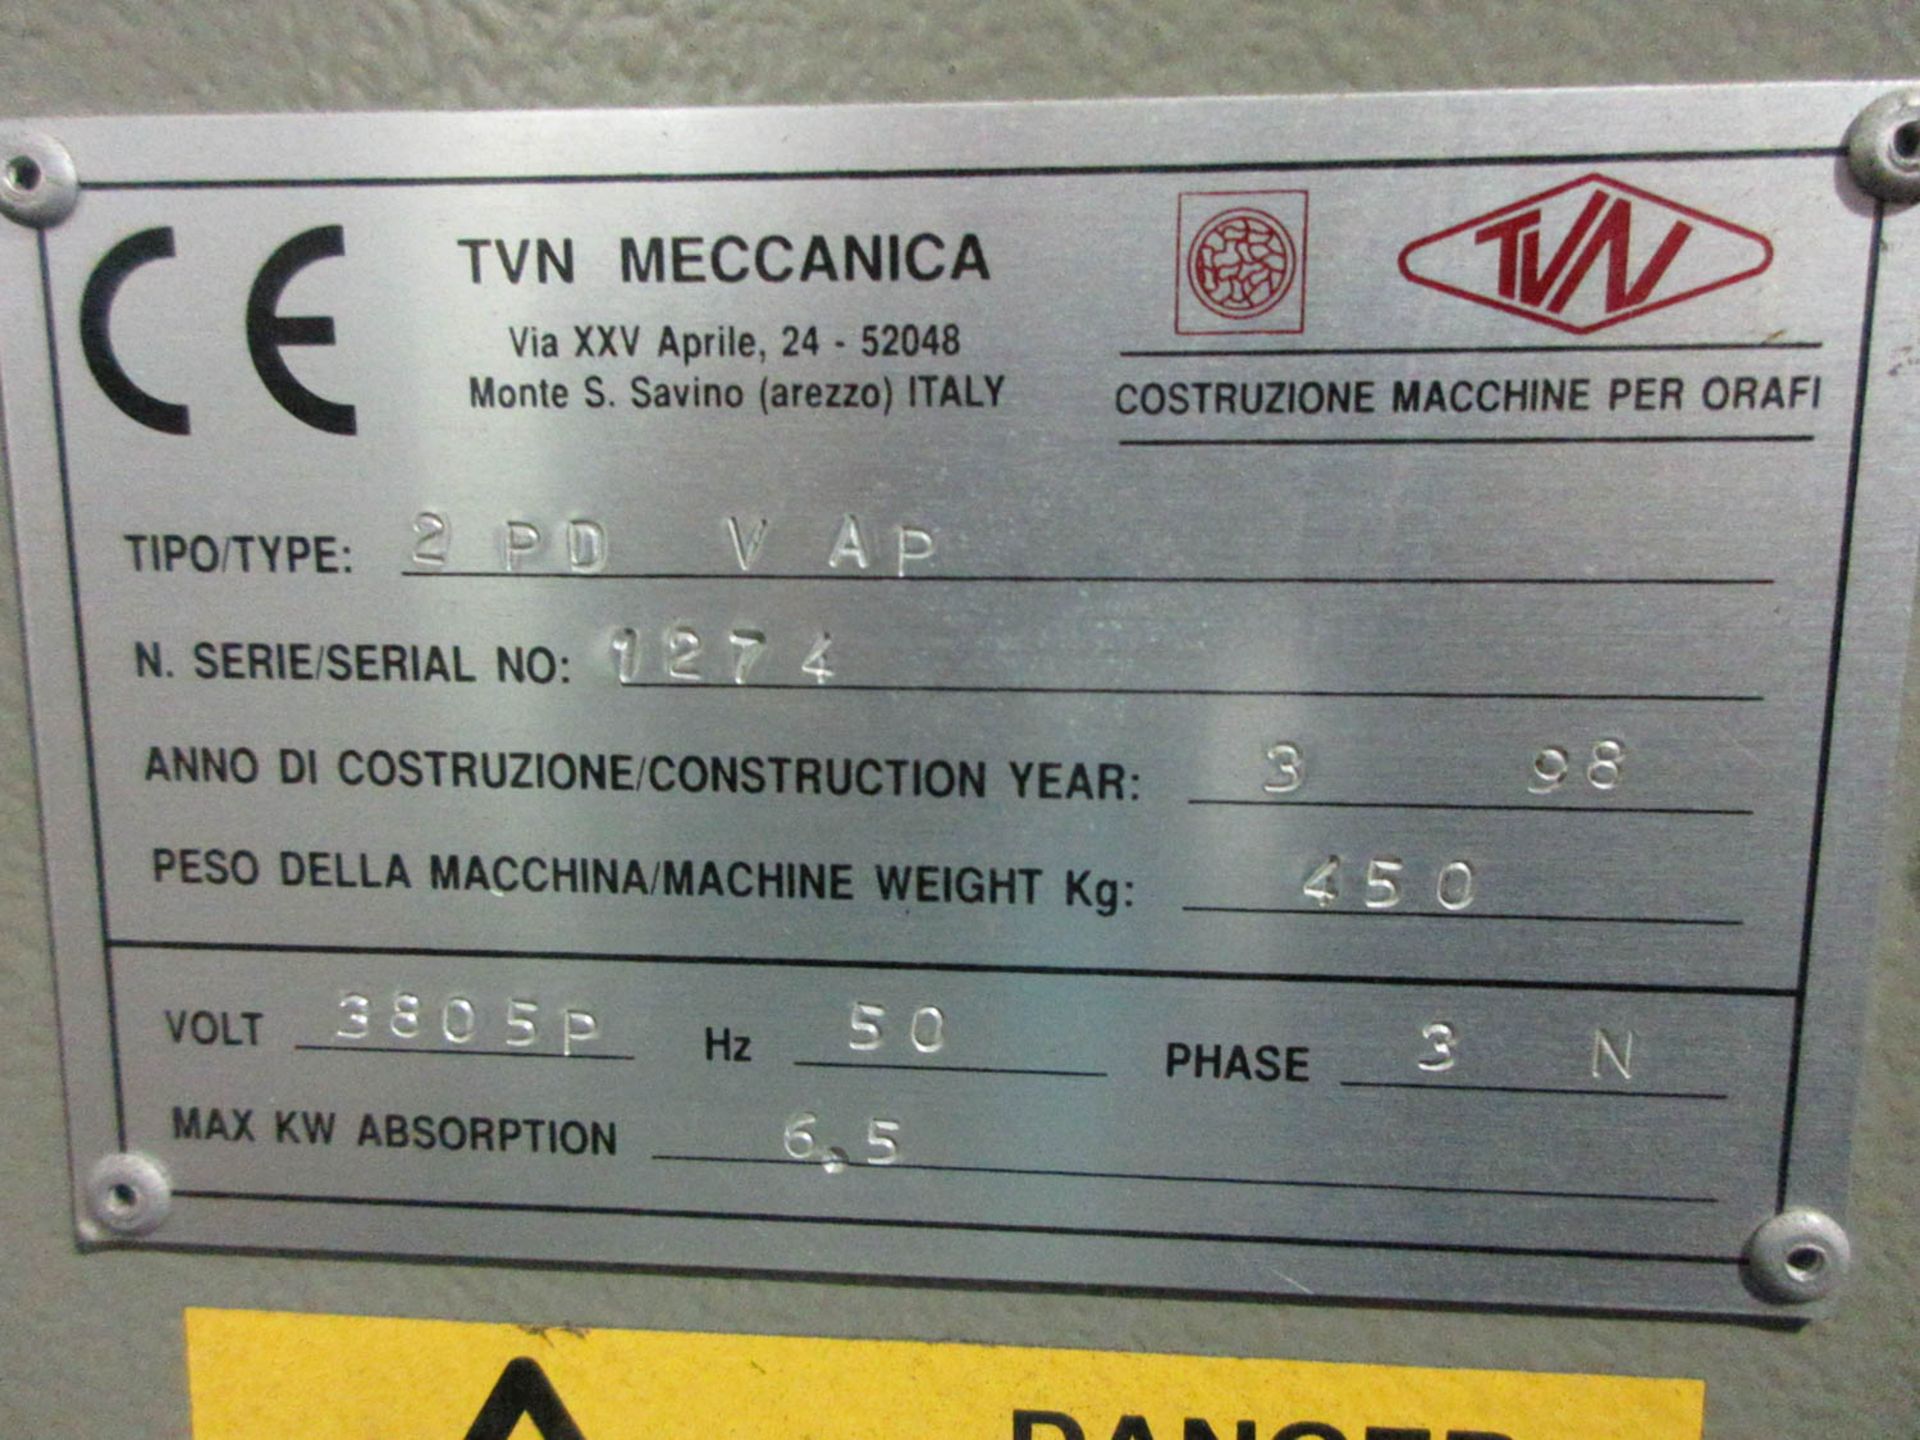 TVN MDL. 2PD VAP SCHLEIF TABLE TVN HORIZONTAL TANK MOUNT; 3 STAGE; WEIGHT 450 KG; 380V; 50 HZ, S/ - Image 2 of 2